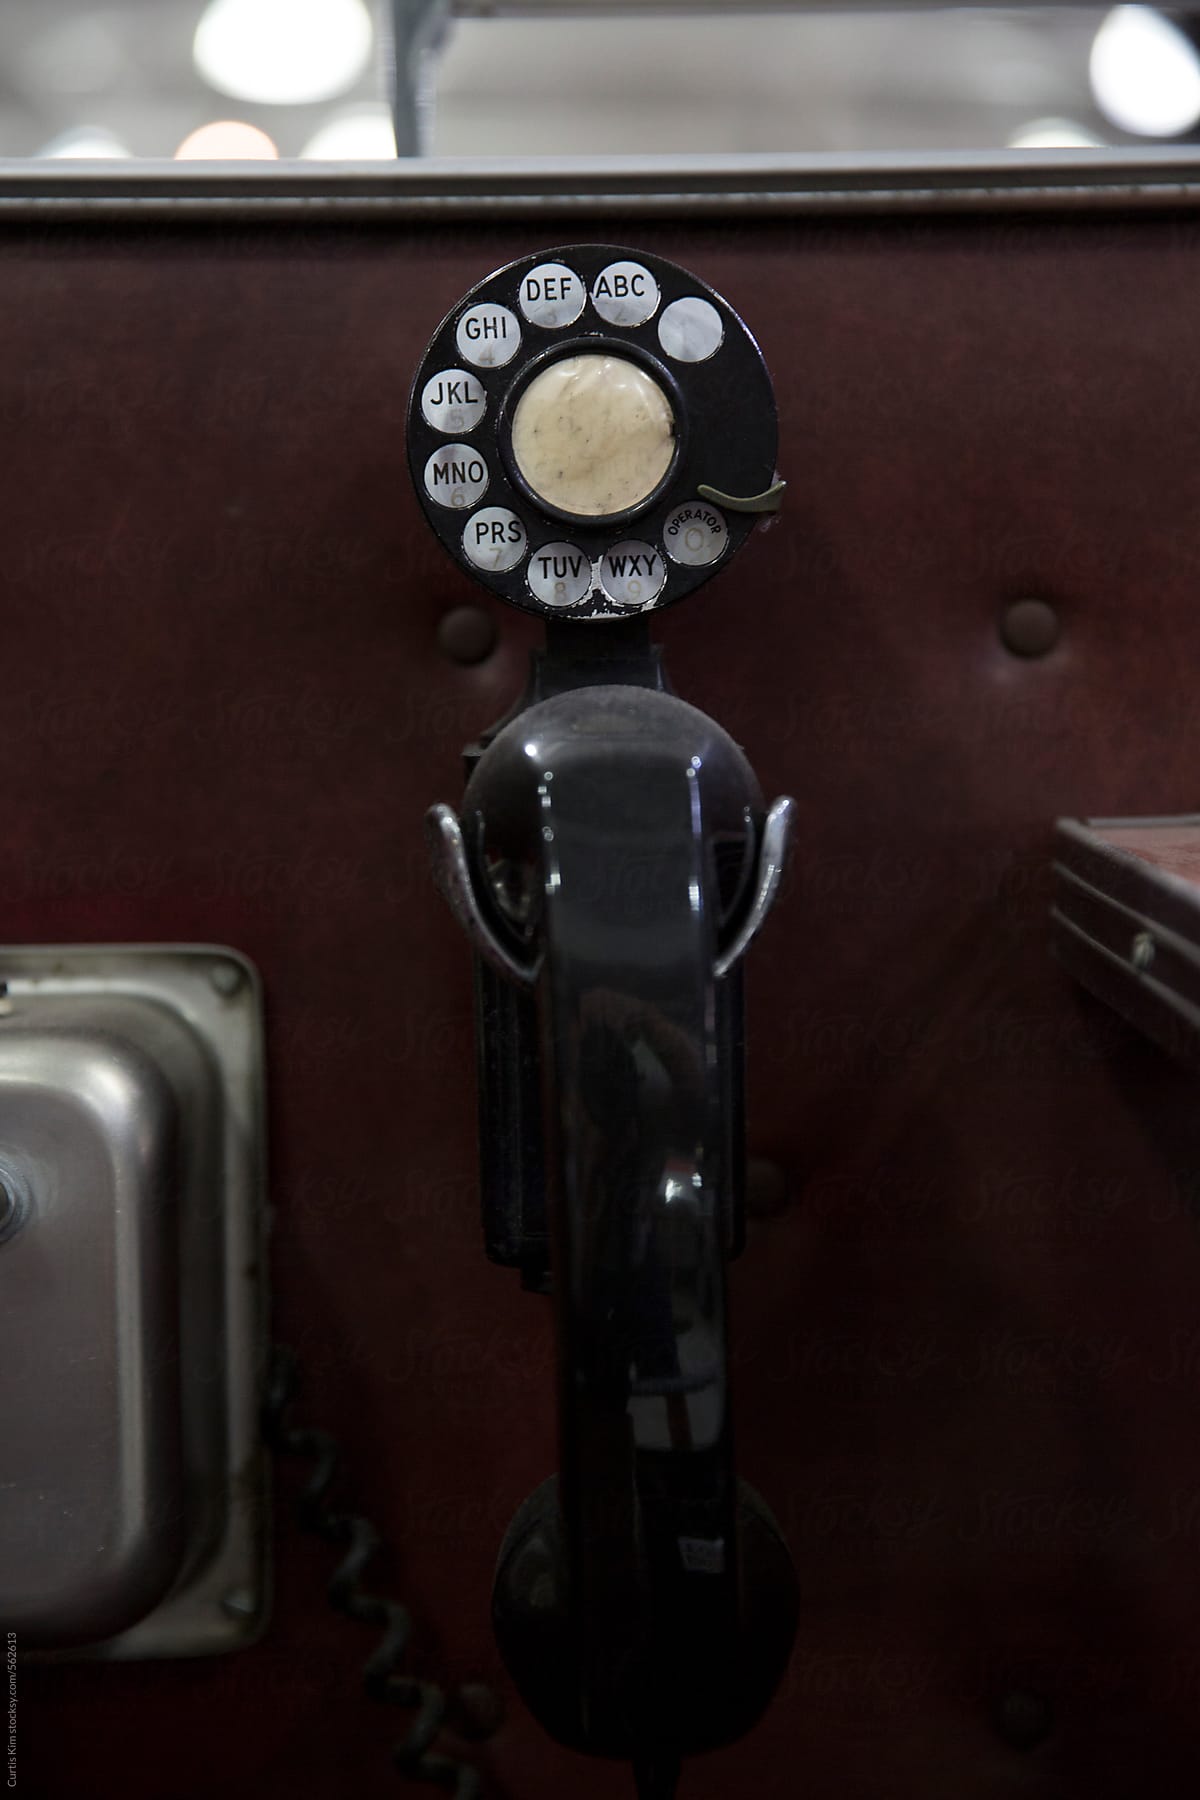 Retro vintage phone inside the door of a traveling car